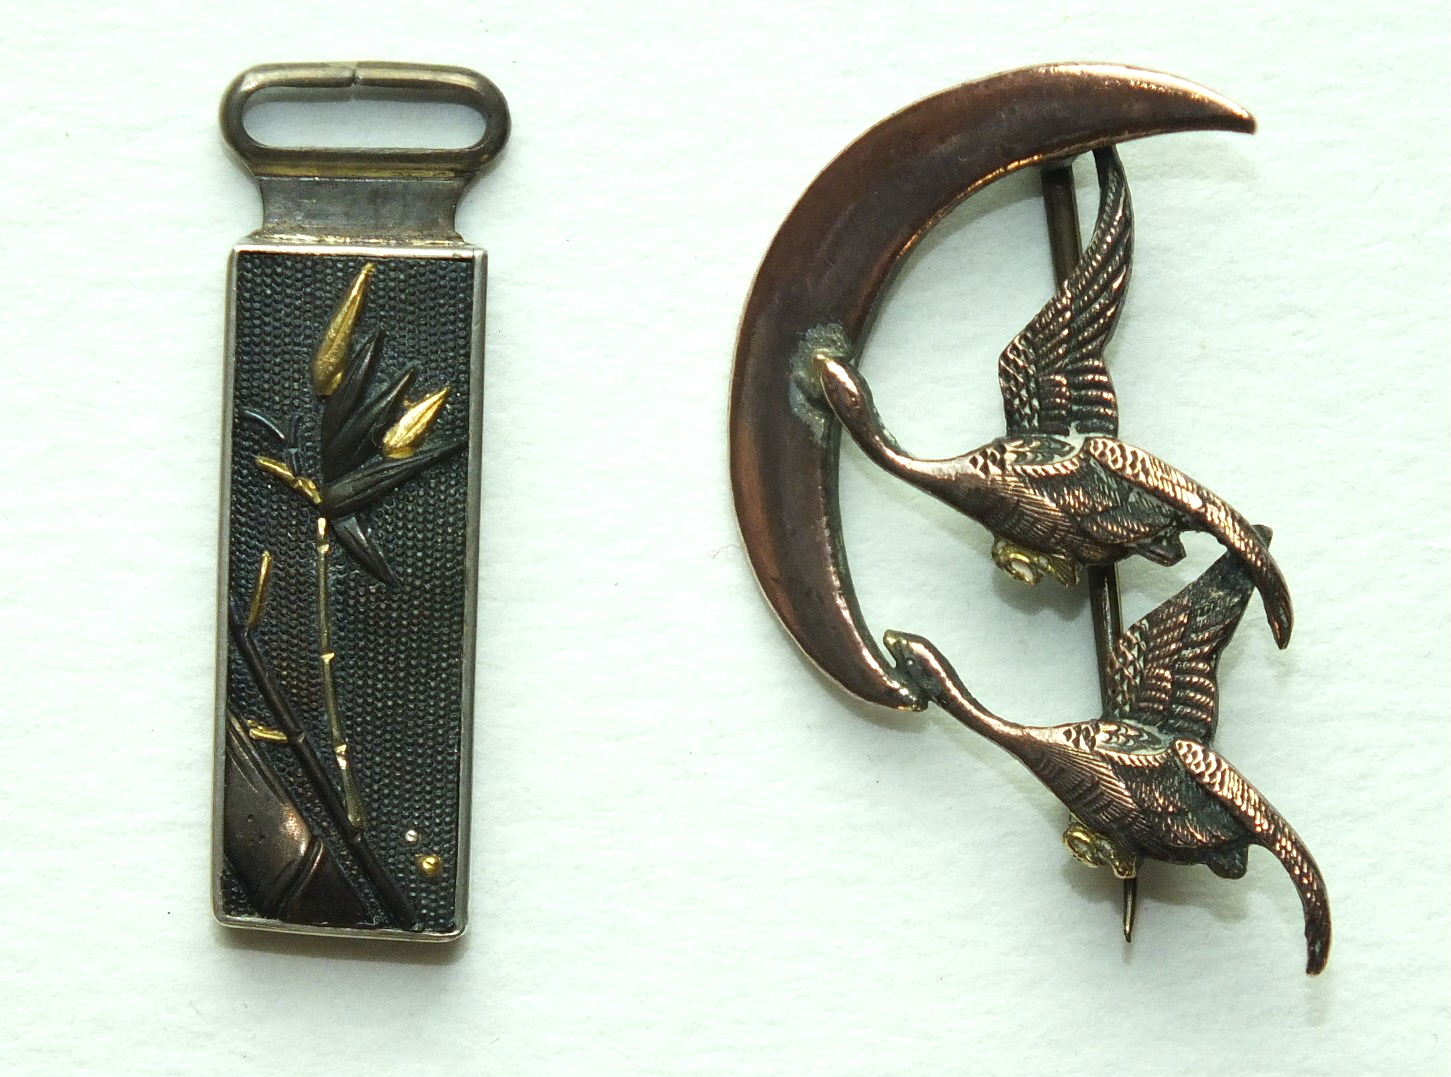 A small oblong Shakudo pendant with bamboo decoration, 32mm long, a brooch in the form of two